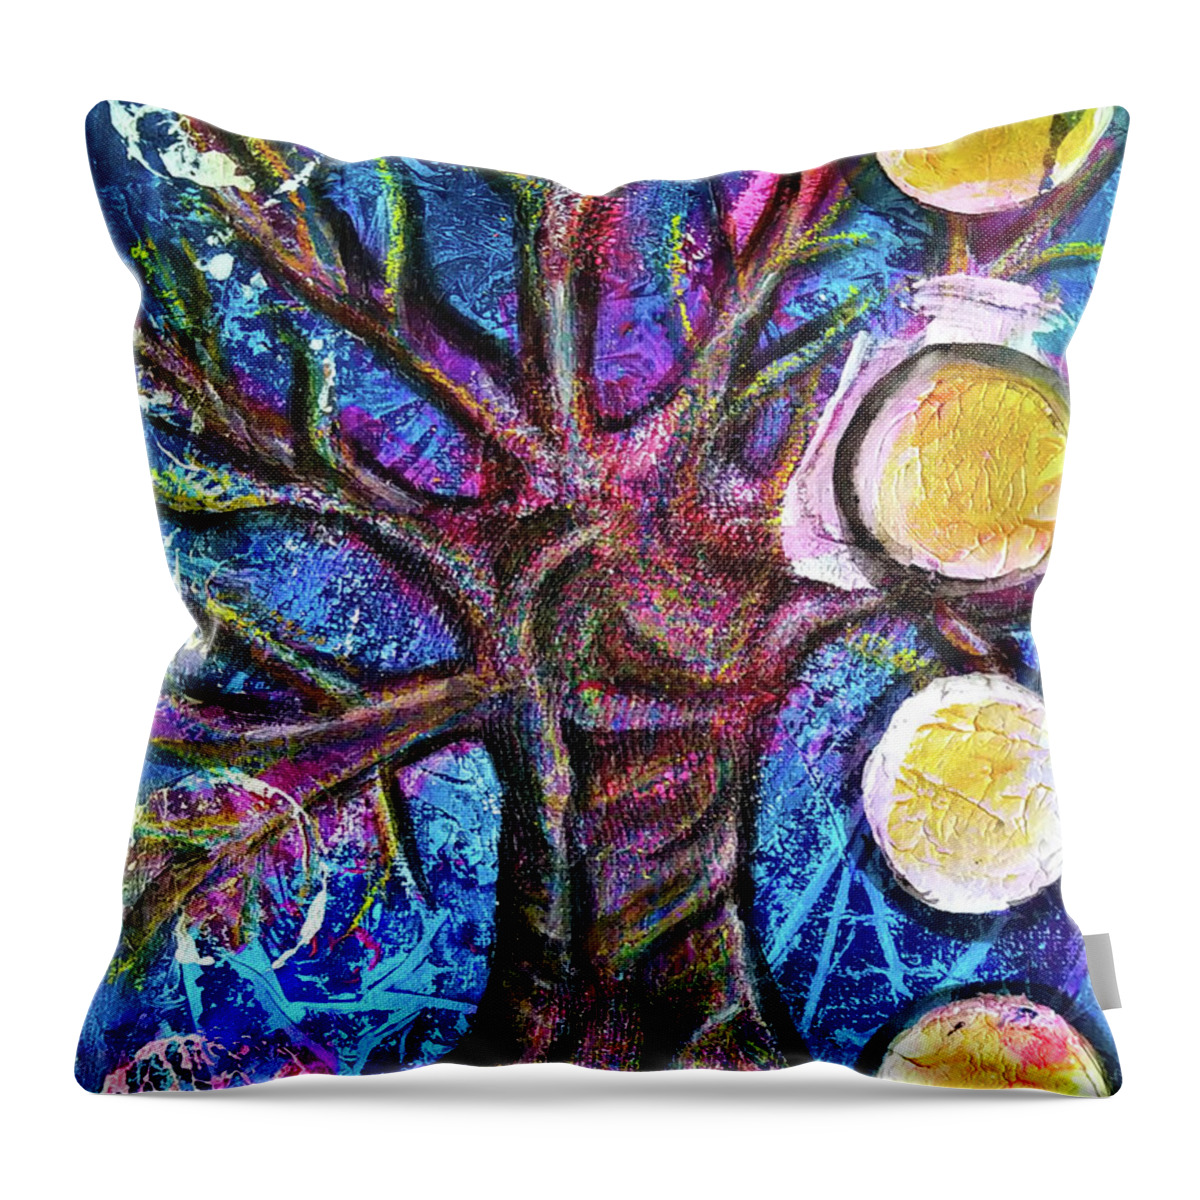 Wisdom Throw Pillow featuring the mixed media Wise One by Mimulux Patricia No